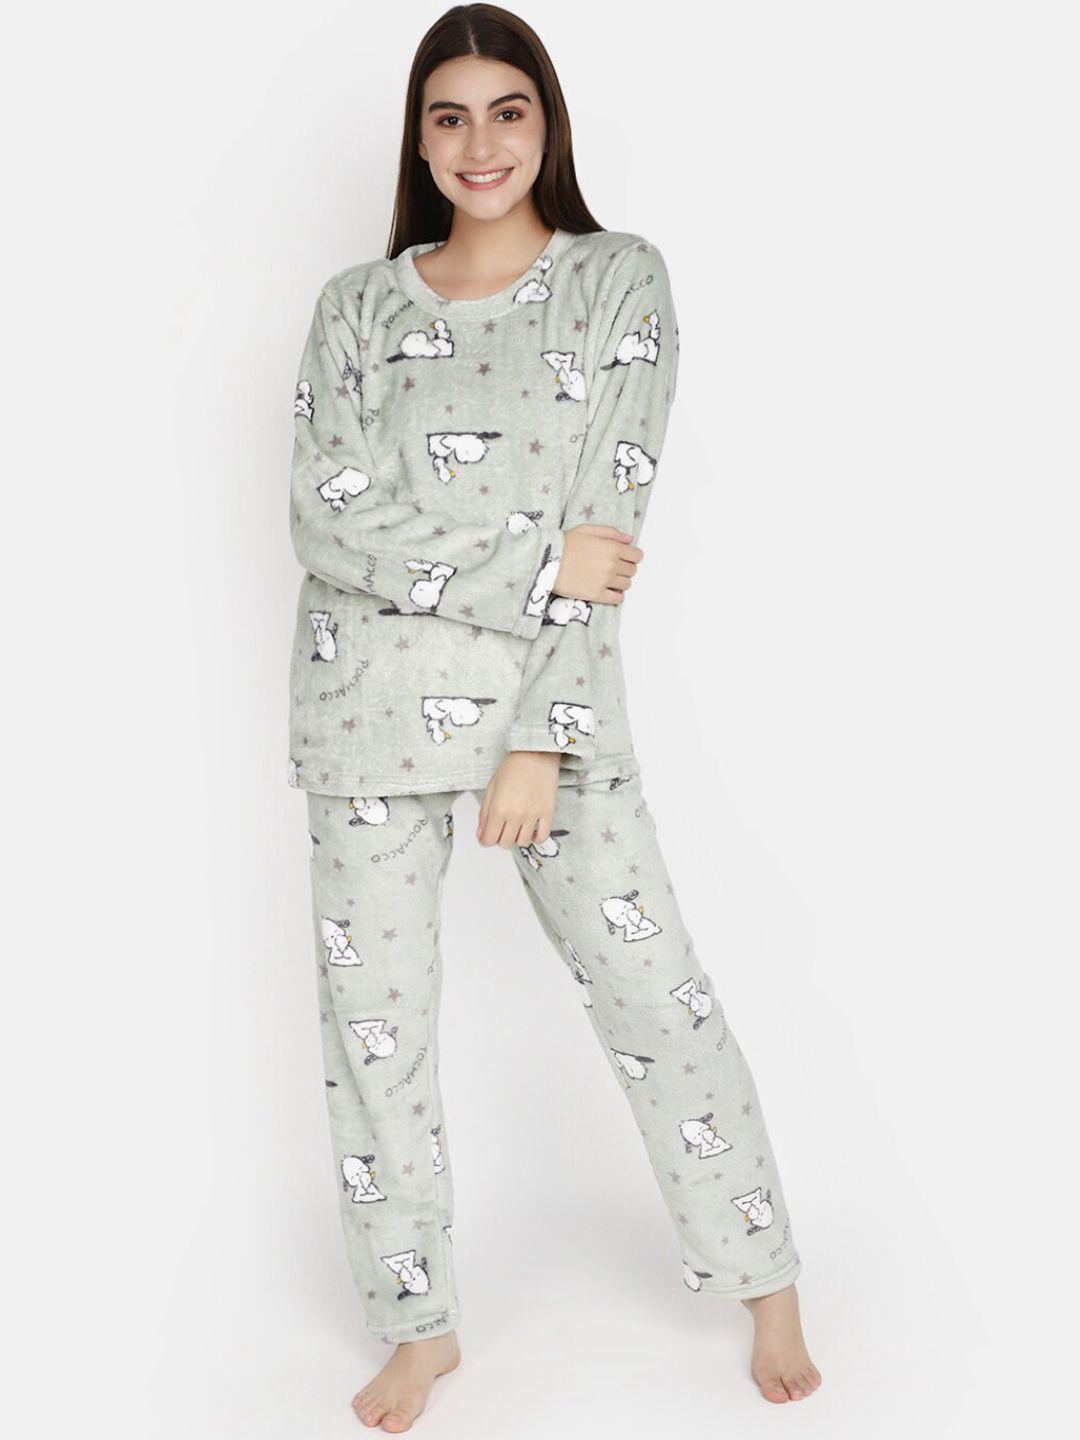 v-mart graphic printed pure cotton night suit